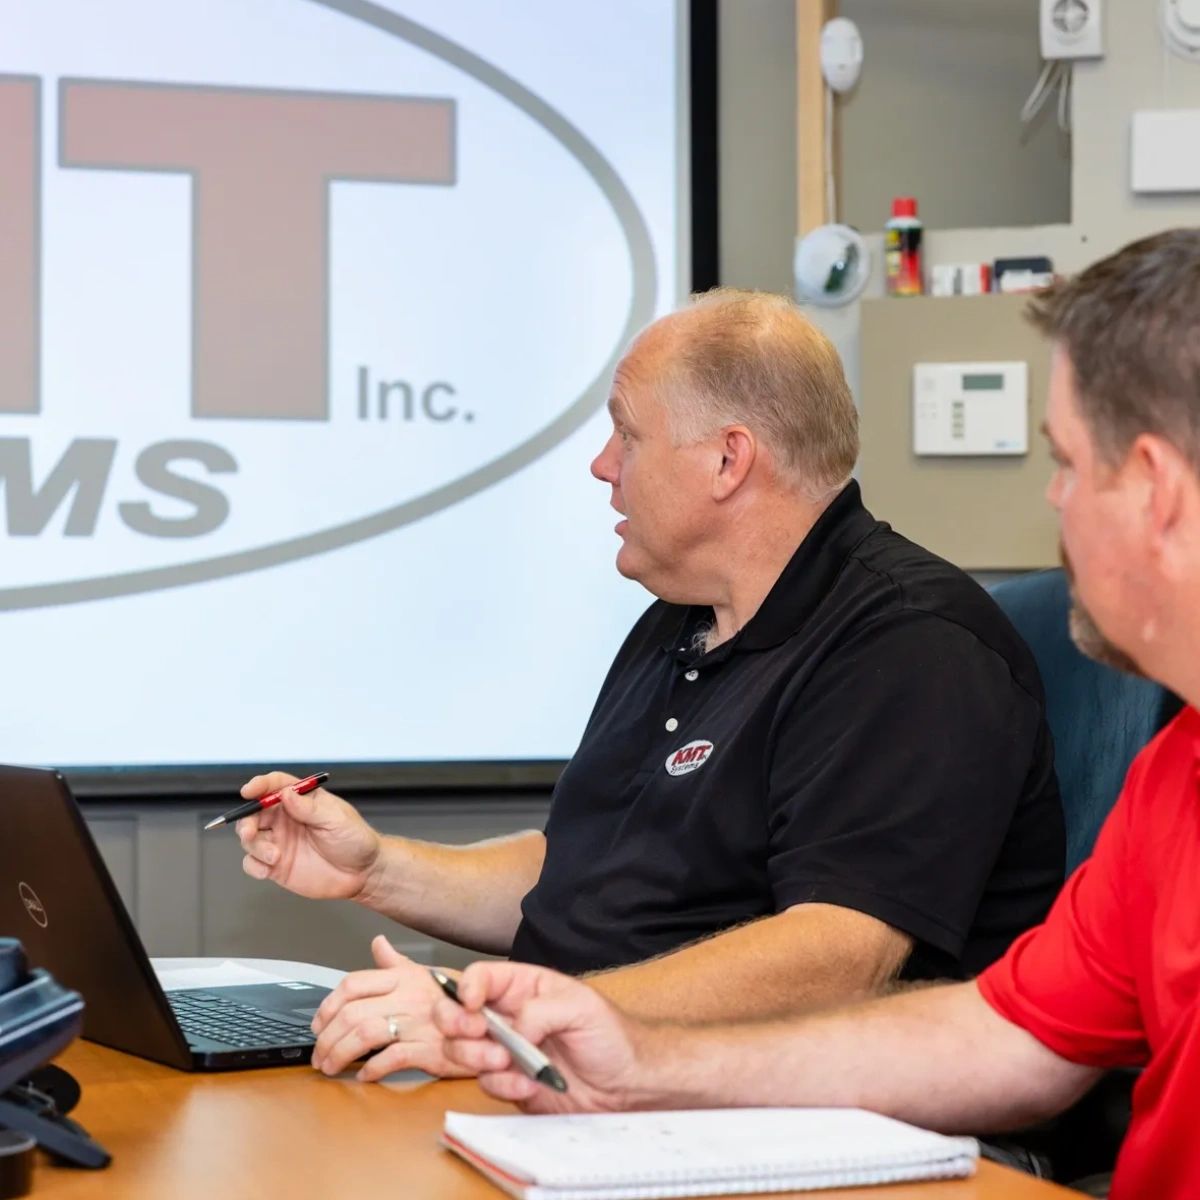 📝 No long-term contracts required! At KMT Systems, we believe in giving our clients the flexibility they deserve. We’ll let you customize your security system to best fit your needs! #KMTSystems #SecuritySystem #ResidentialSecurity #CommercialSecurity #McDonoughGeorgia